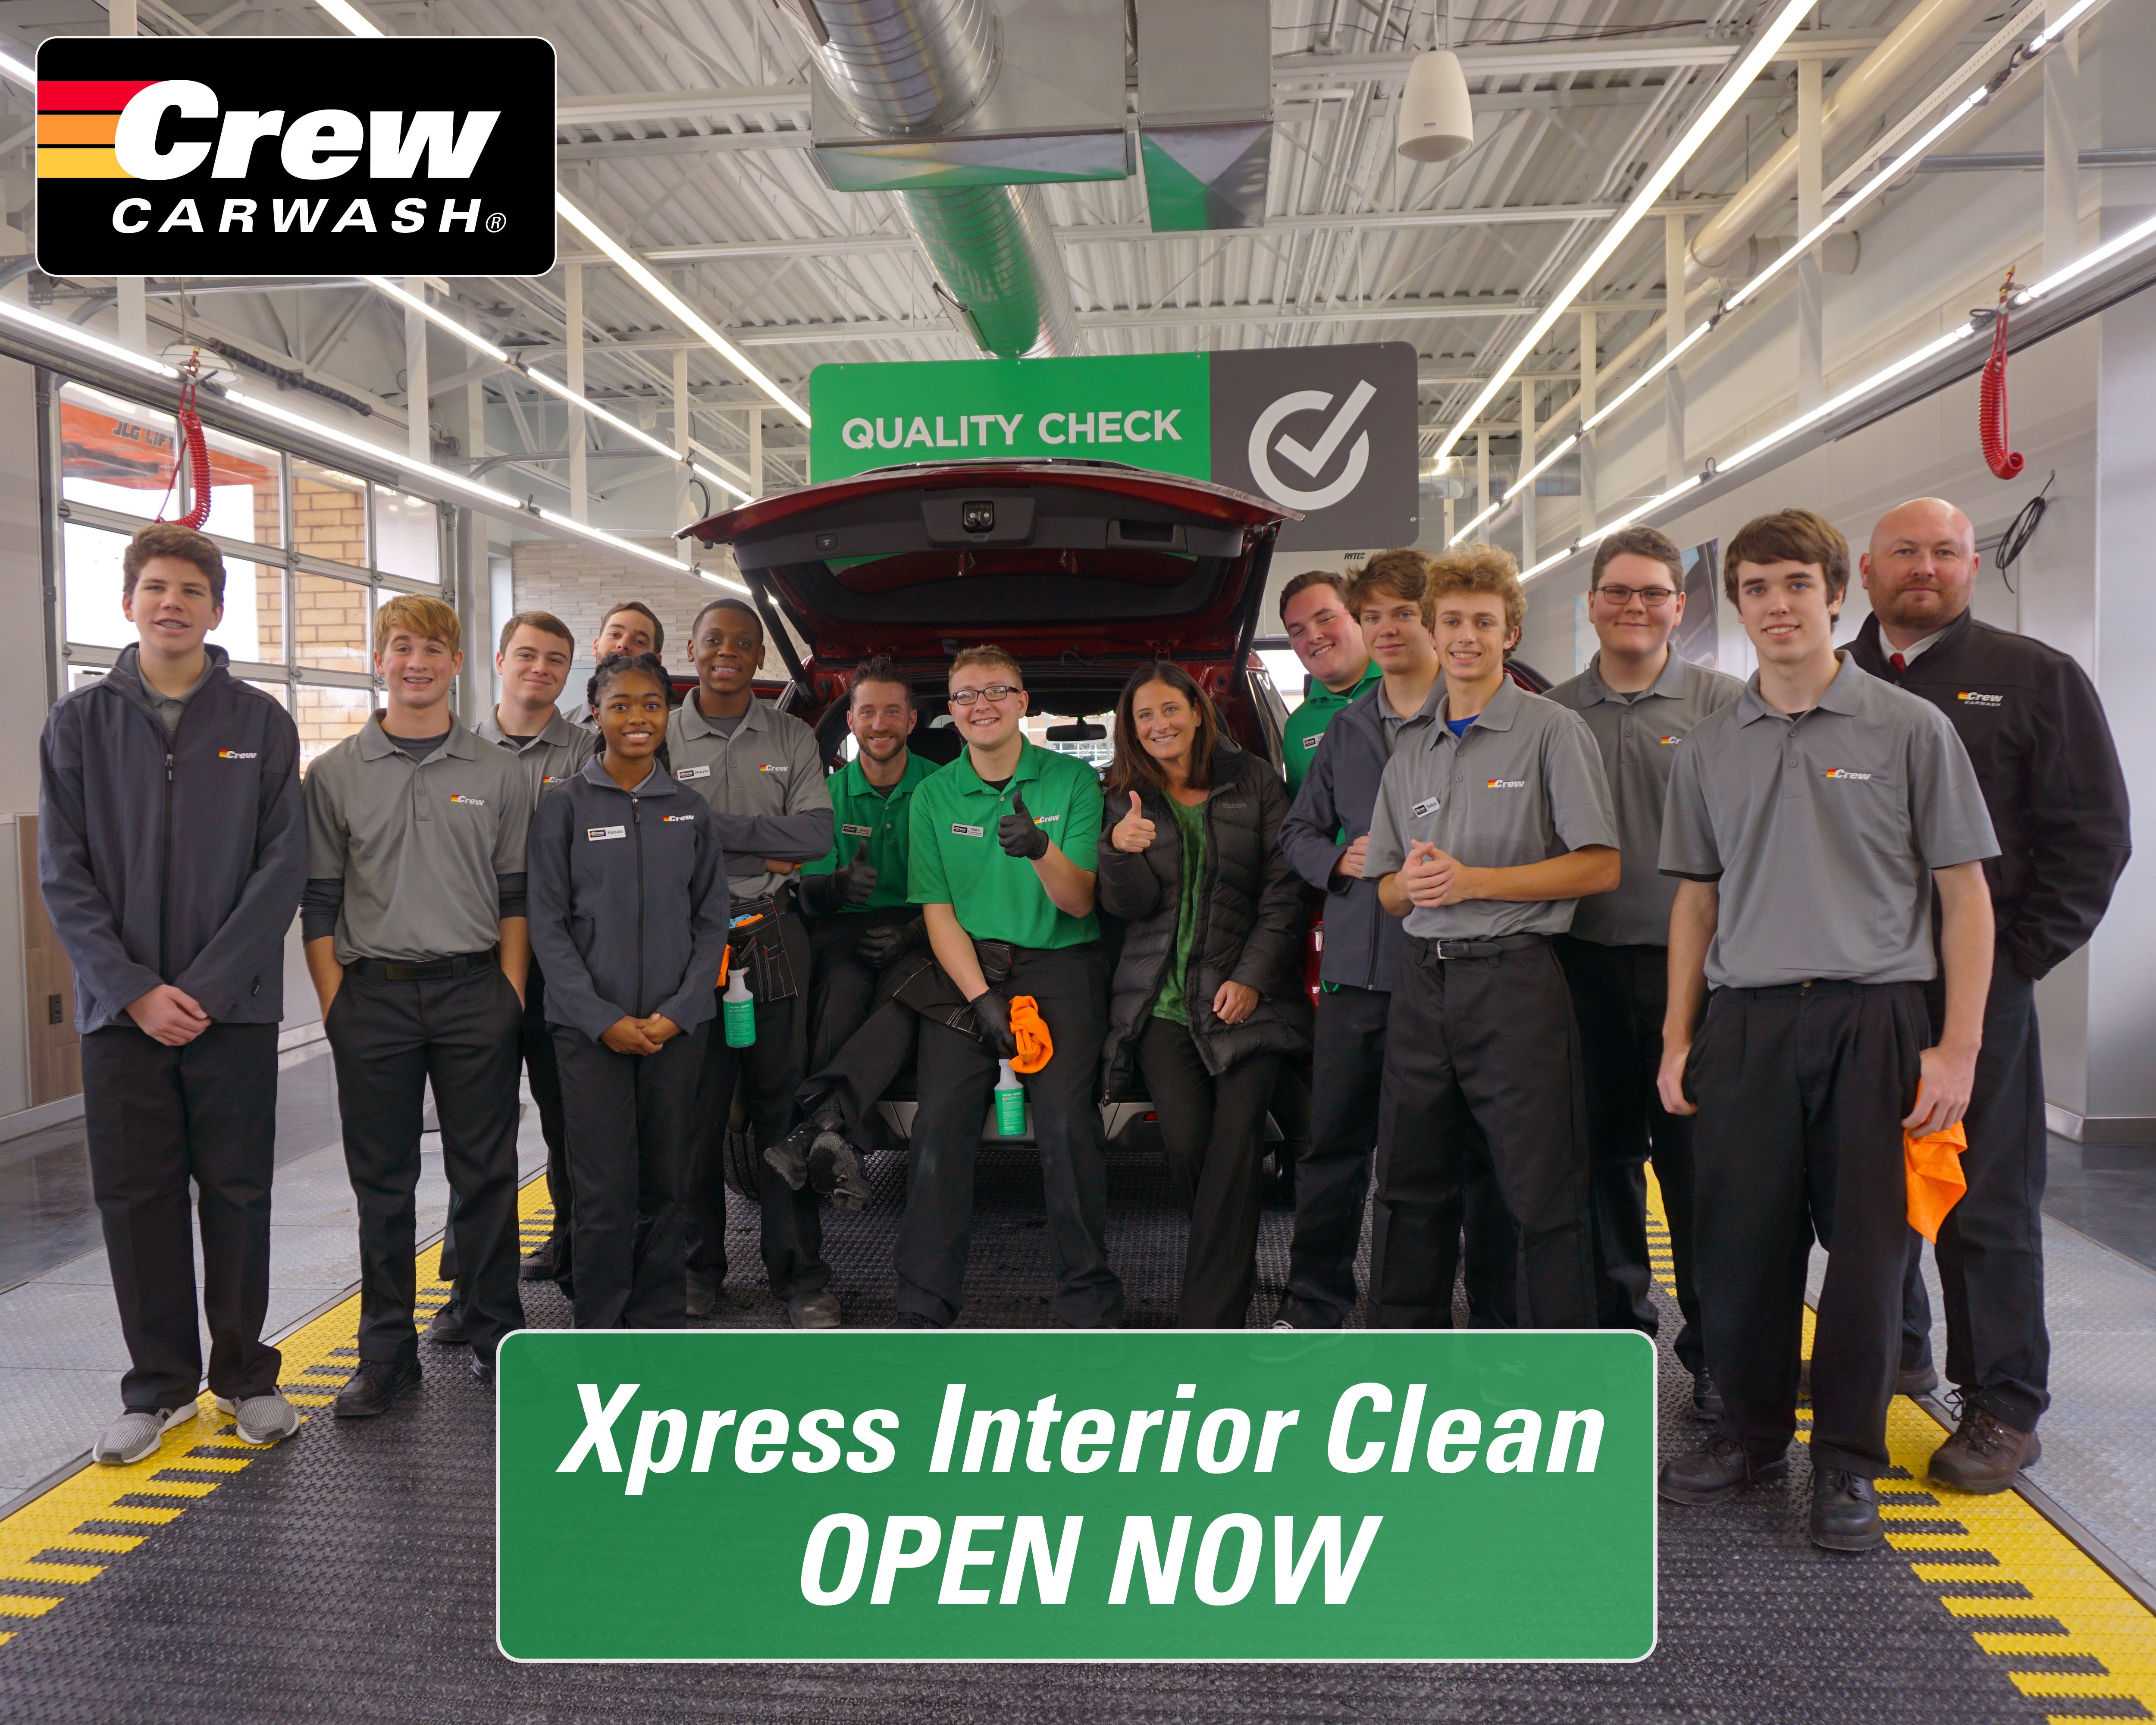 Crew Carwash Opens Exciting New Innovation Xpress Interior